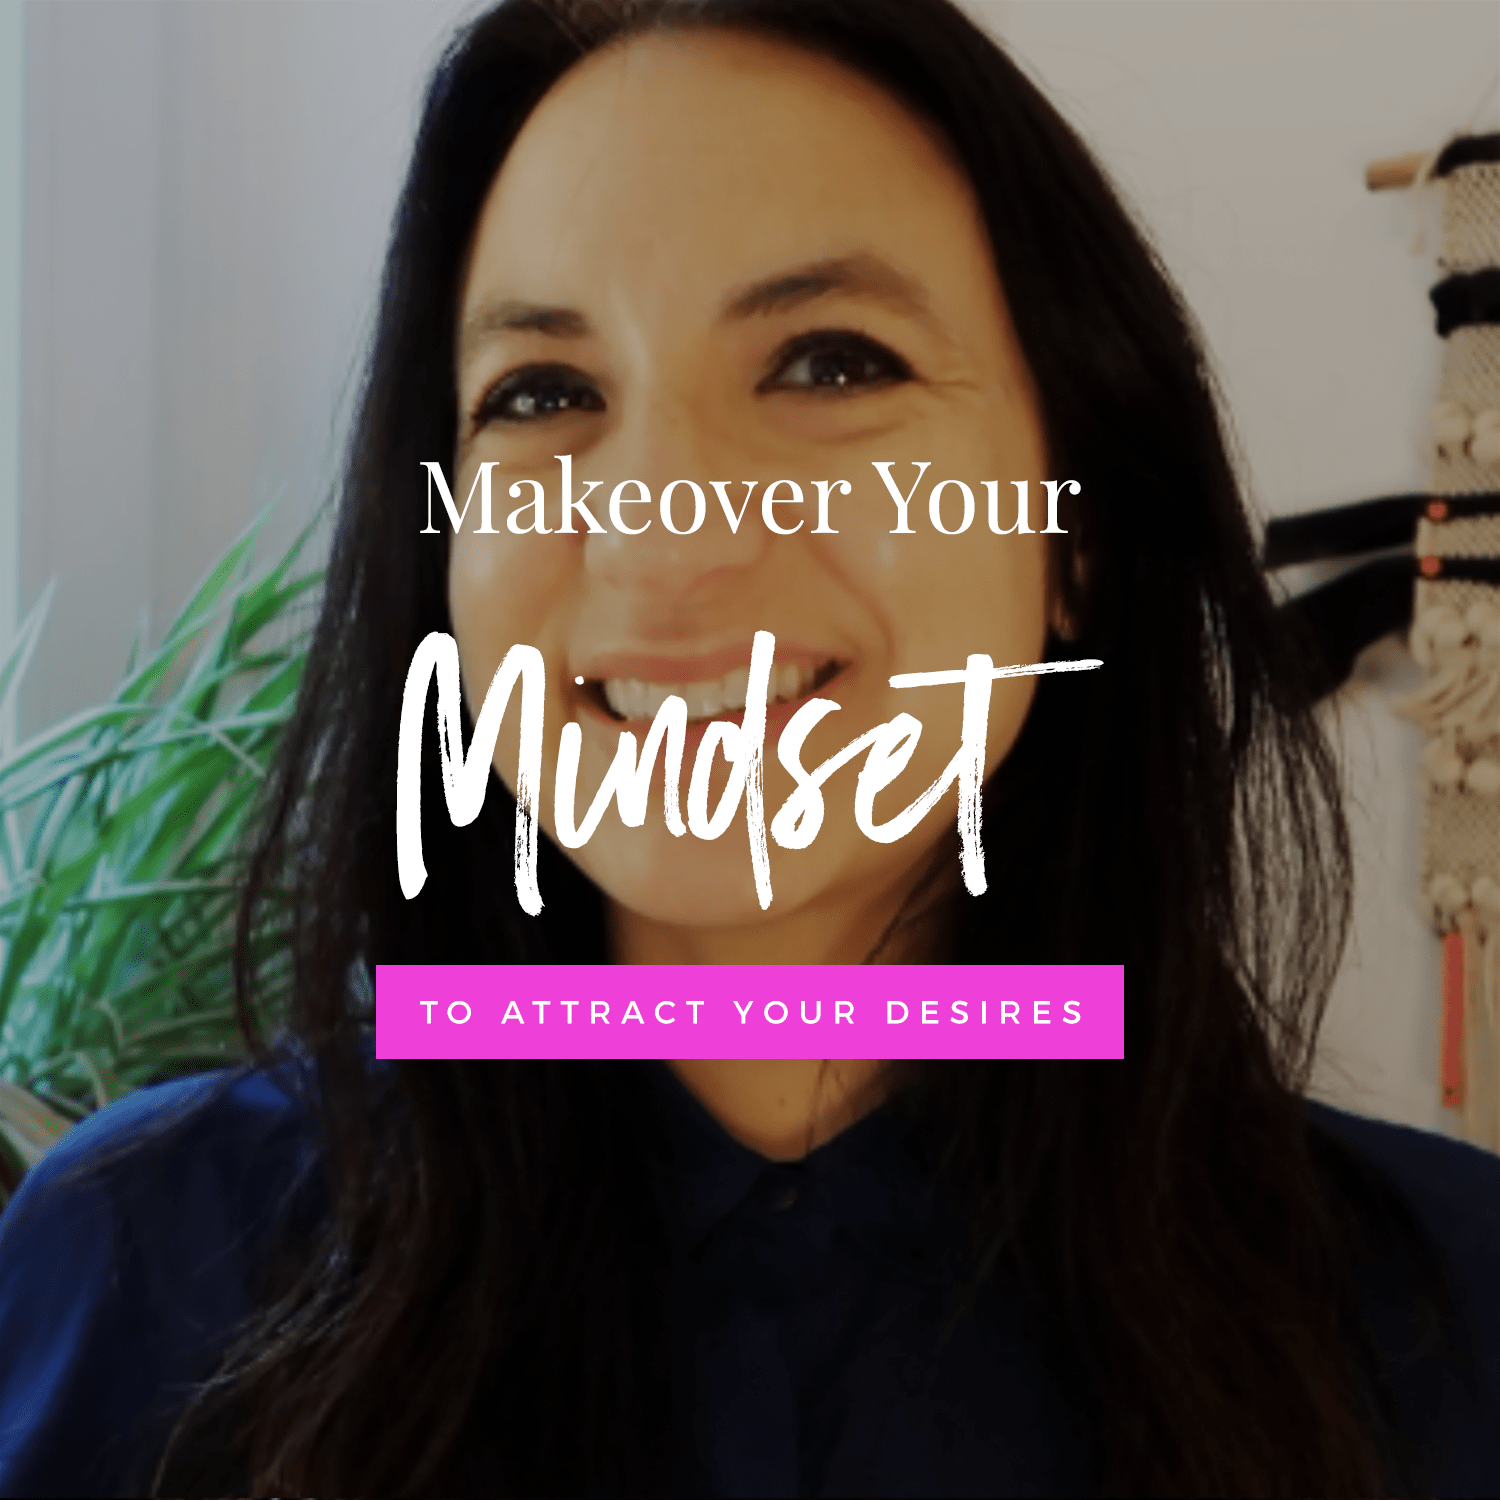 Makeover Your Mindset To Attract Your Desires | Mindset + Manifestation Techniques